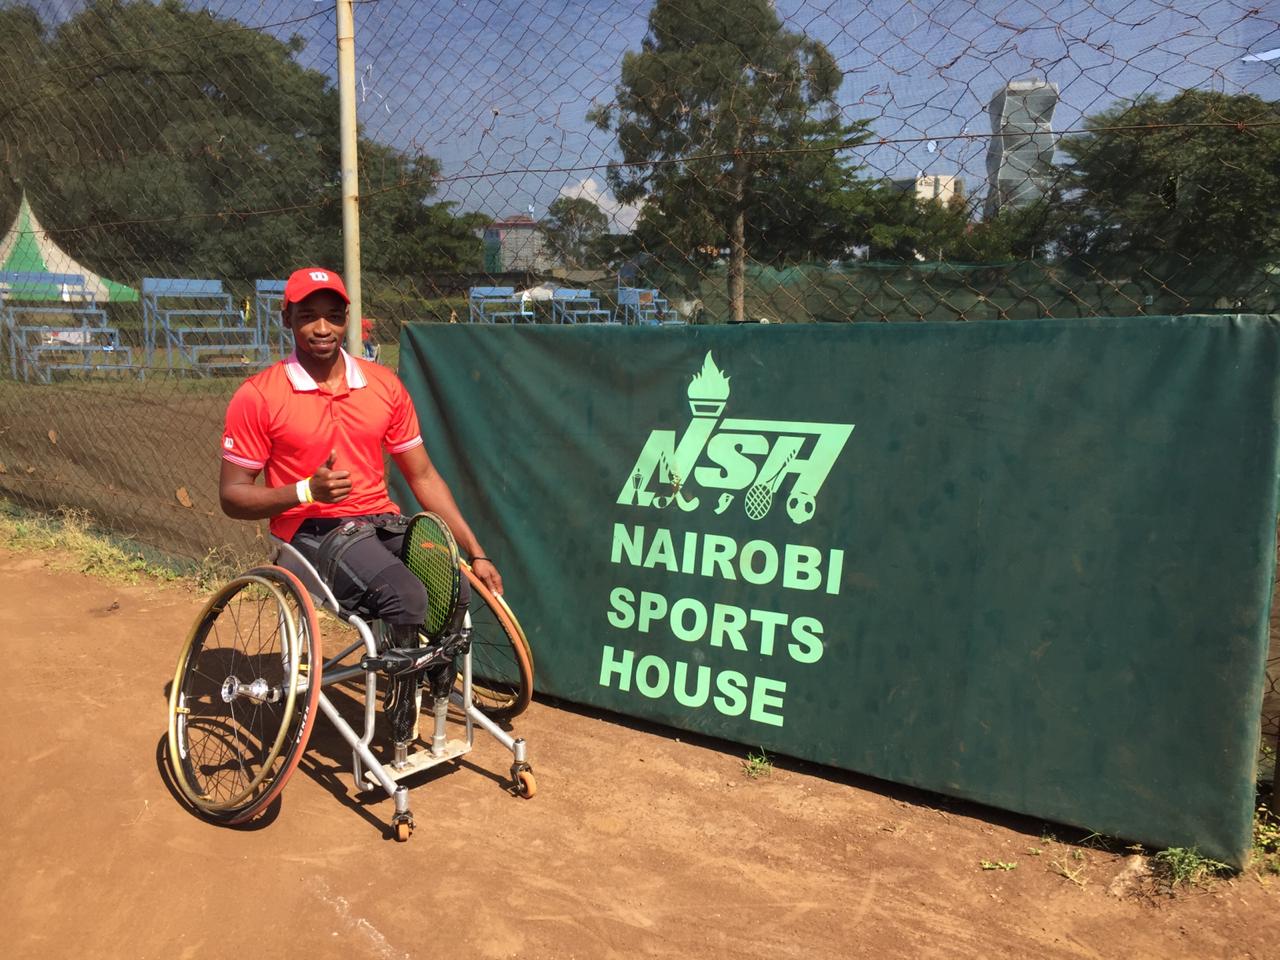 South African men's number 1 Evans Maripa after his victory at the Nairobi Open in Kenya on Wednesday